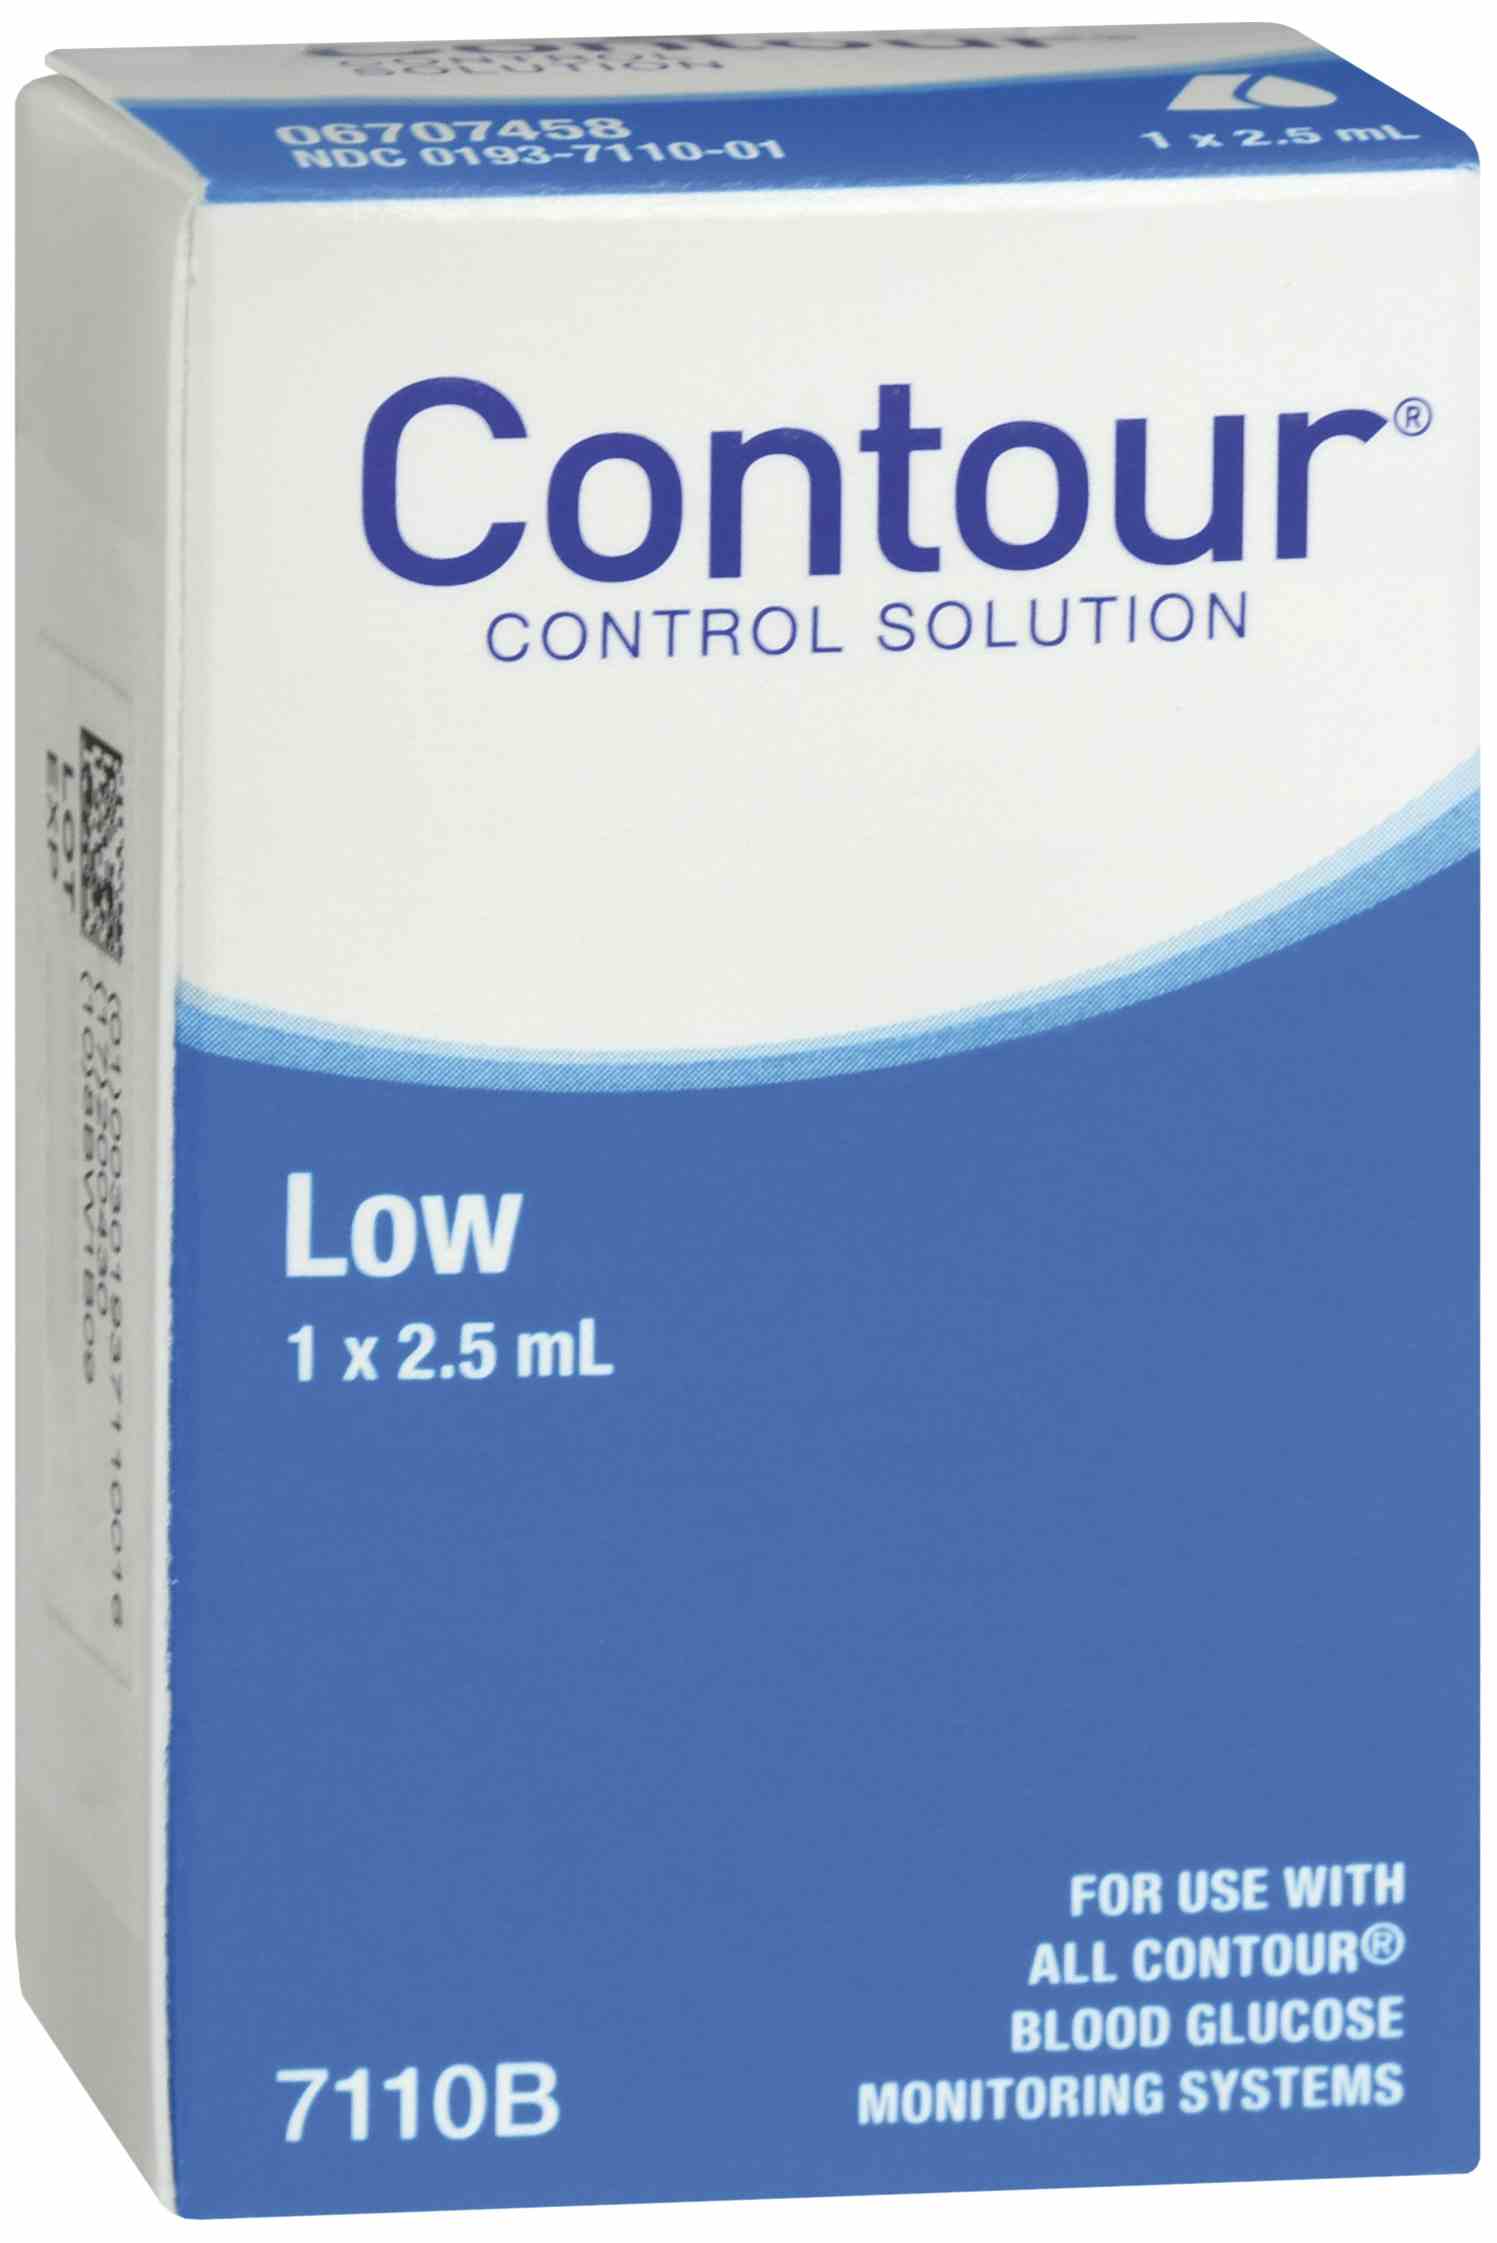 Bayer Contour Blood Glucose Control Solution, Low, 2.5 mL, 7110B, Case of 12